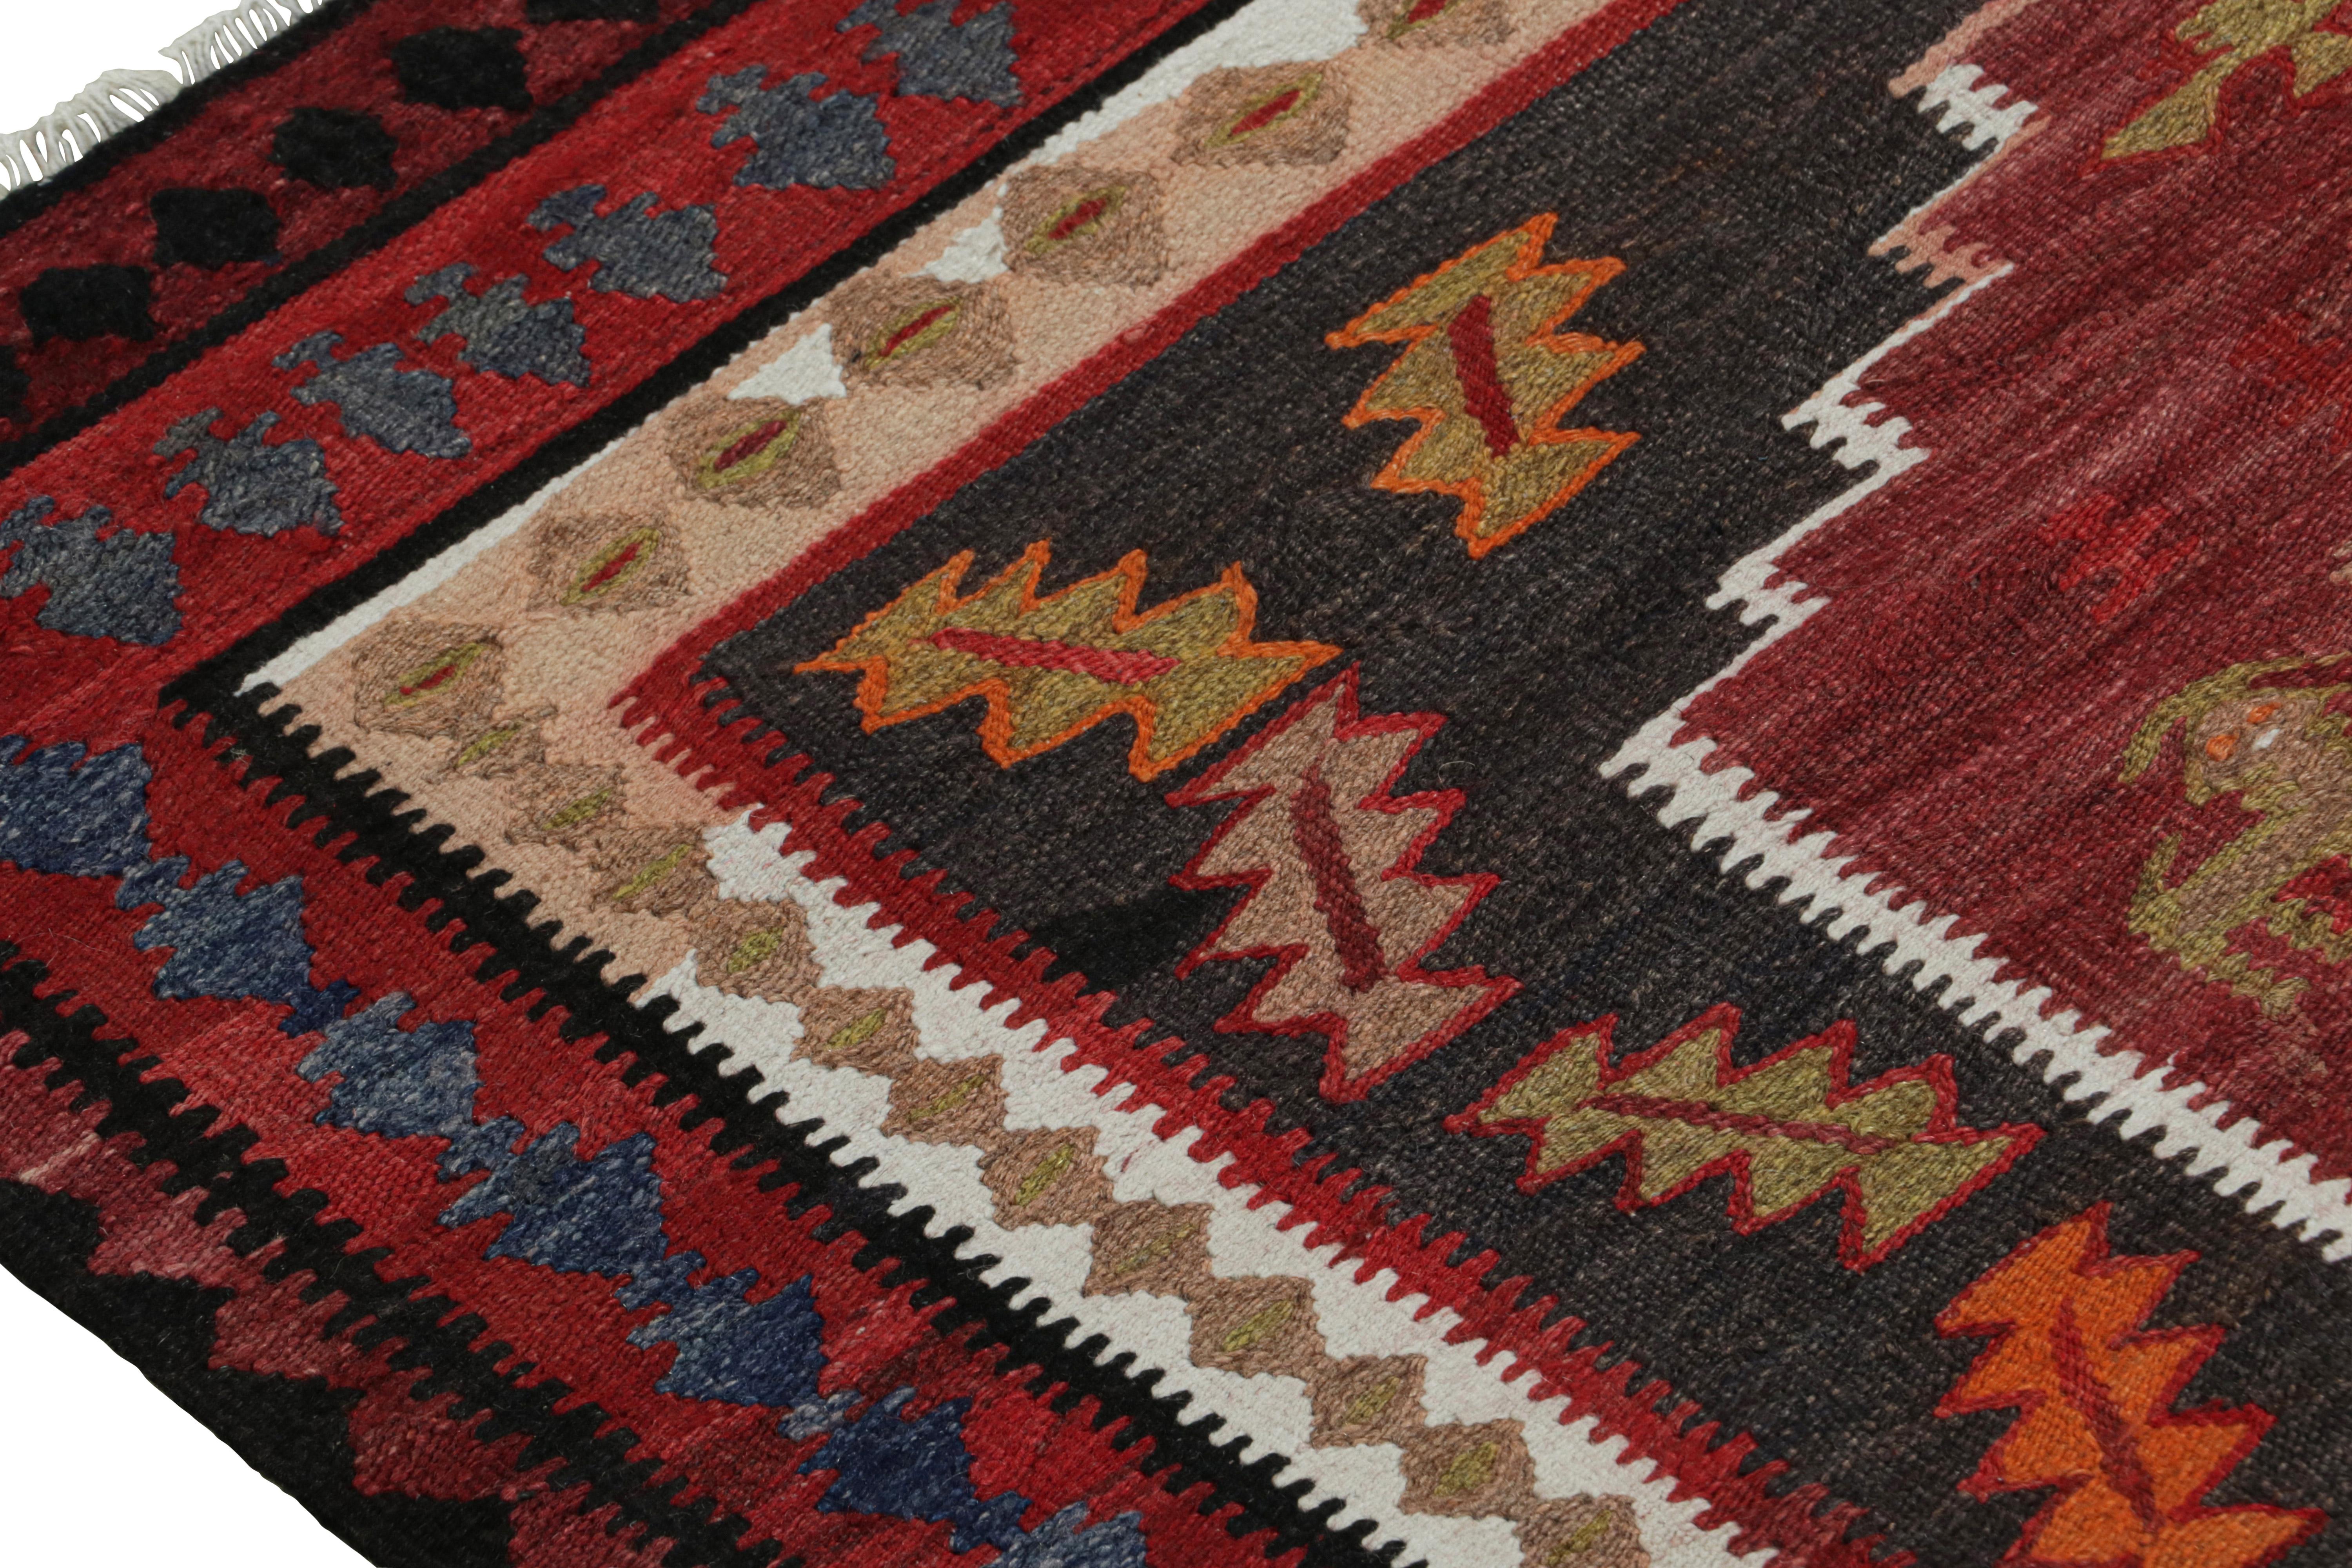 Hand-Woven Vintage tribal Persian Kilim runner rug, with Pictorial motifs, from Rug & Kilim For Sale